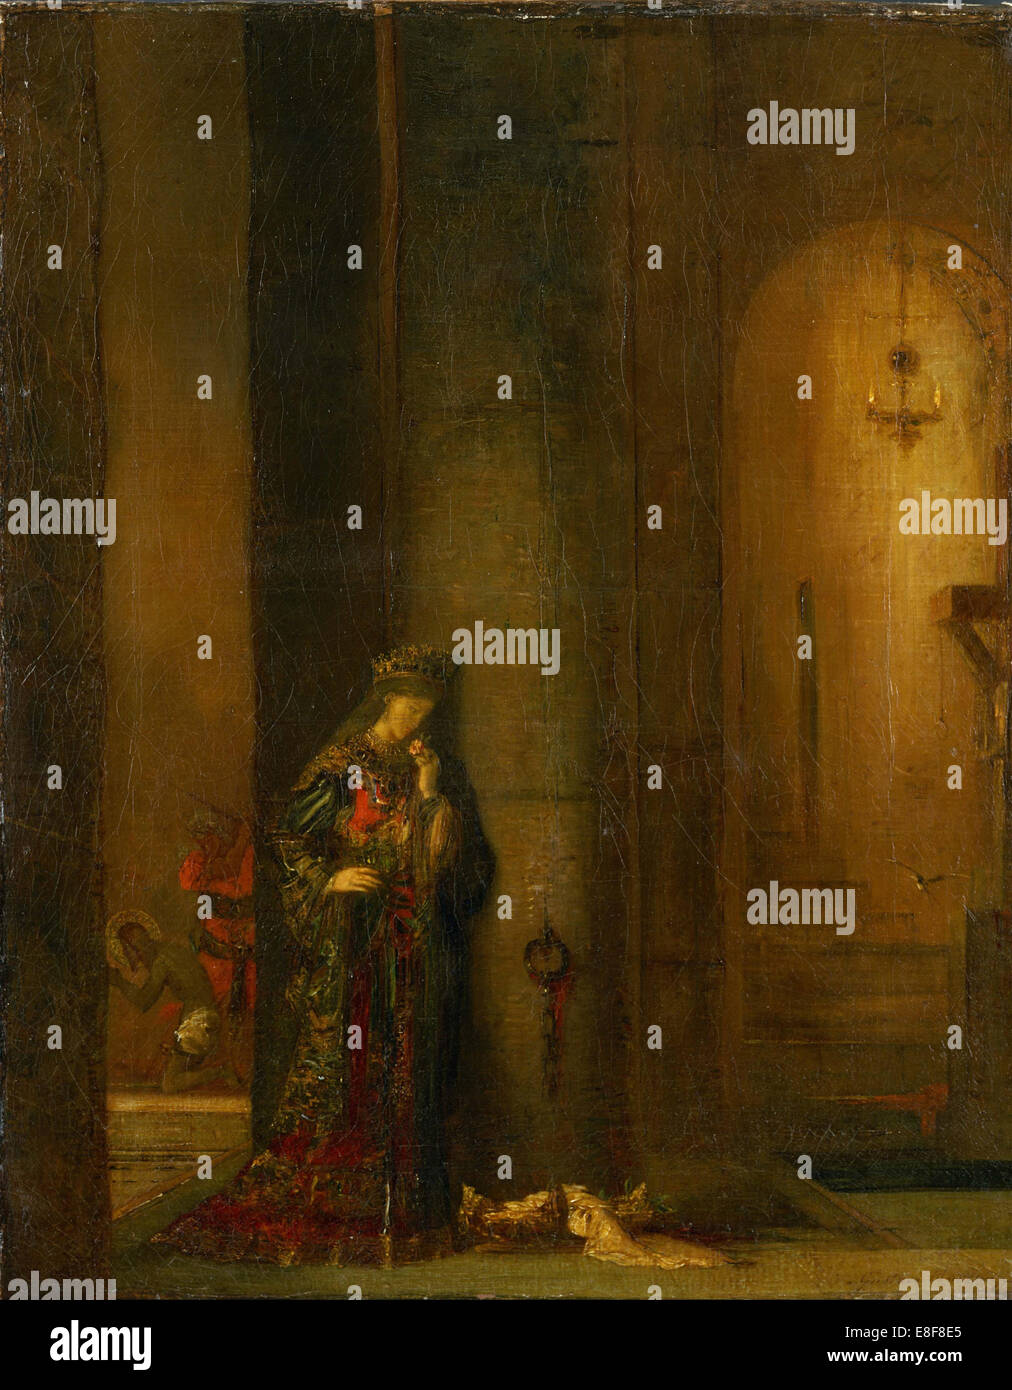 Salome at the Prison. Artist: Moreau, Gustave (1826-1898) Stock Photo